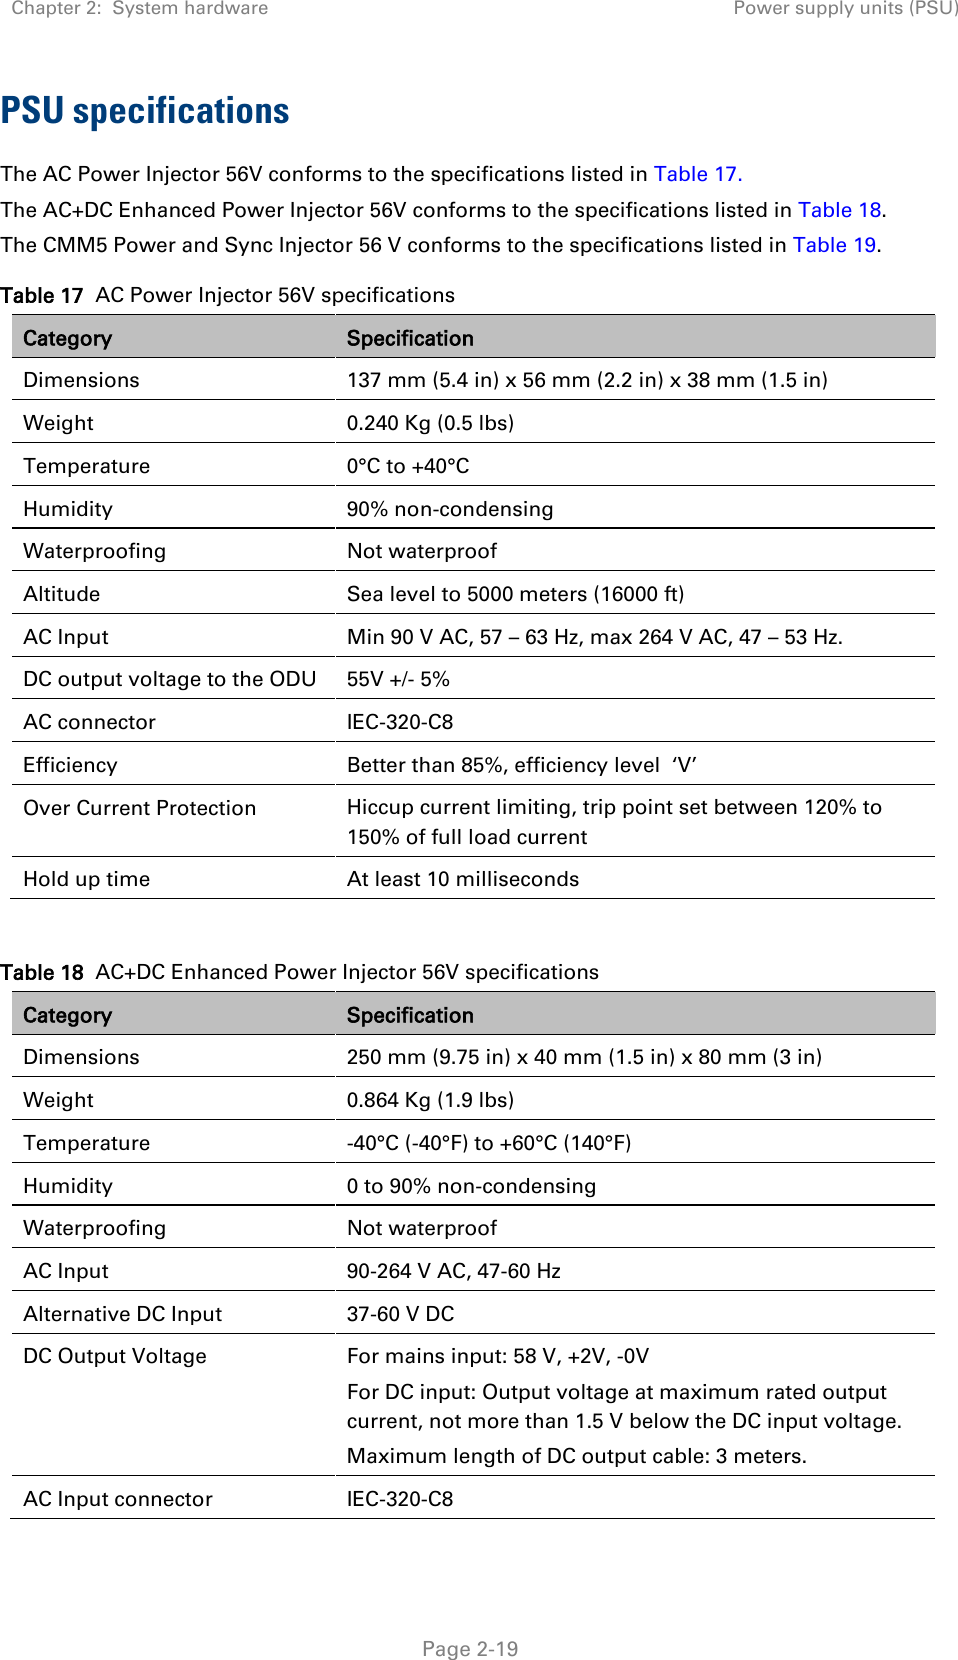 Chapter 2:  System hardware Power supply units (PSU)   Page 2-19 PSU specifications The AC Power Injector 56V conforms to the specifications listed in Table 17. The AC+DC Enhanced Power Injector 56V conforms to the specifications listed in Table 18. The CMM5 Power and Sync Injector 56 V conforms to the specifications listed in Table 19. Table 17  AC Power Injector 56V specifications Category Specification Dimensions 137 mm (5.4 in) x 56 mm (2.2 in) x 38 mm (1.5 in) Weight   0.240 Kg (0.5 lbs) Temperature   0°C to +40°C Humidity   90% non-condensing Waterproofing   Not waterproof Altitude Sea level to 5000 meters (16000 ft) AC Input Min 90 V AC, 57 – 63 Hz, max 264 V AC, 47 – 53 Hz. DC output voltage to the ODU 55V +/- 5% AC connector IEC-320-C8 Efficiency Better than 85%, efficiency level  ‘V’ Over Current Protection Hiccup current limiting, trip point set between 120% to 150% of full load current Hold up time  At least 10 milliseconds  Table 18  AC+DC Enhanced Power Injector 56V specifications Category Specification Dimensions 250 mm (9.75 in) x 40 mm (1.5 in) x 80 mm (3 in) Weight   0.864 Kg (1.9 lbs) Temperature   -40°C (-40°F) to +60°C (140°F) Humidity  0 to 90% non-condensing Waterproofing   Not waterproof AC Input 90-264 V AC, 47-60 Hz Alternative DC Input 37-60 V DC DC Output Voltage   For mains input: 58 V, +2V, -0V For DC input: Output voltage at maximum rated output current, not more than 1.5 V below the DC input voltage. Maximum length of DC output cable: 3 meters. AC Input connector IEC-320-C8 